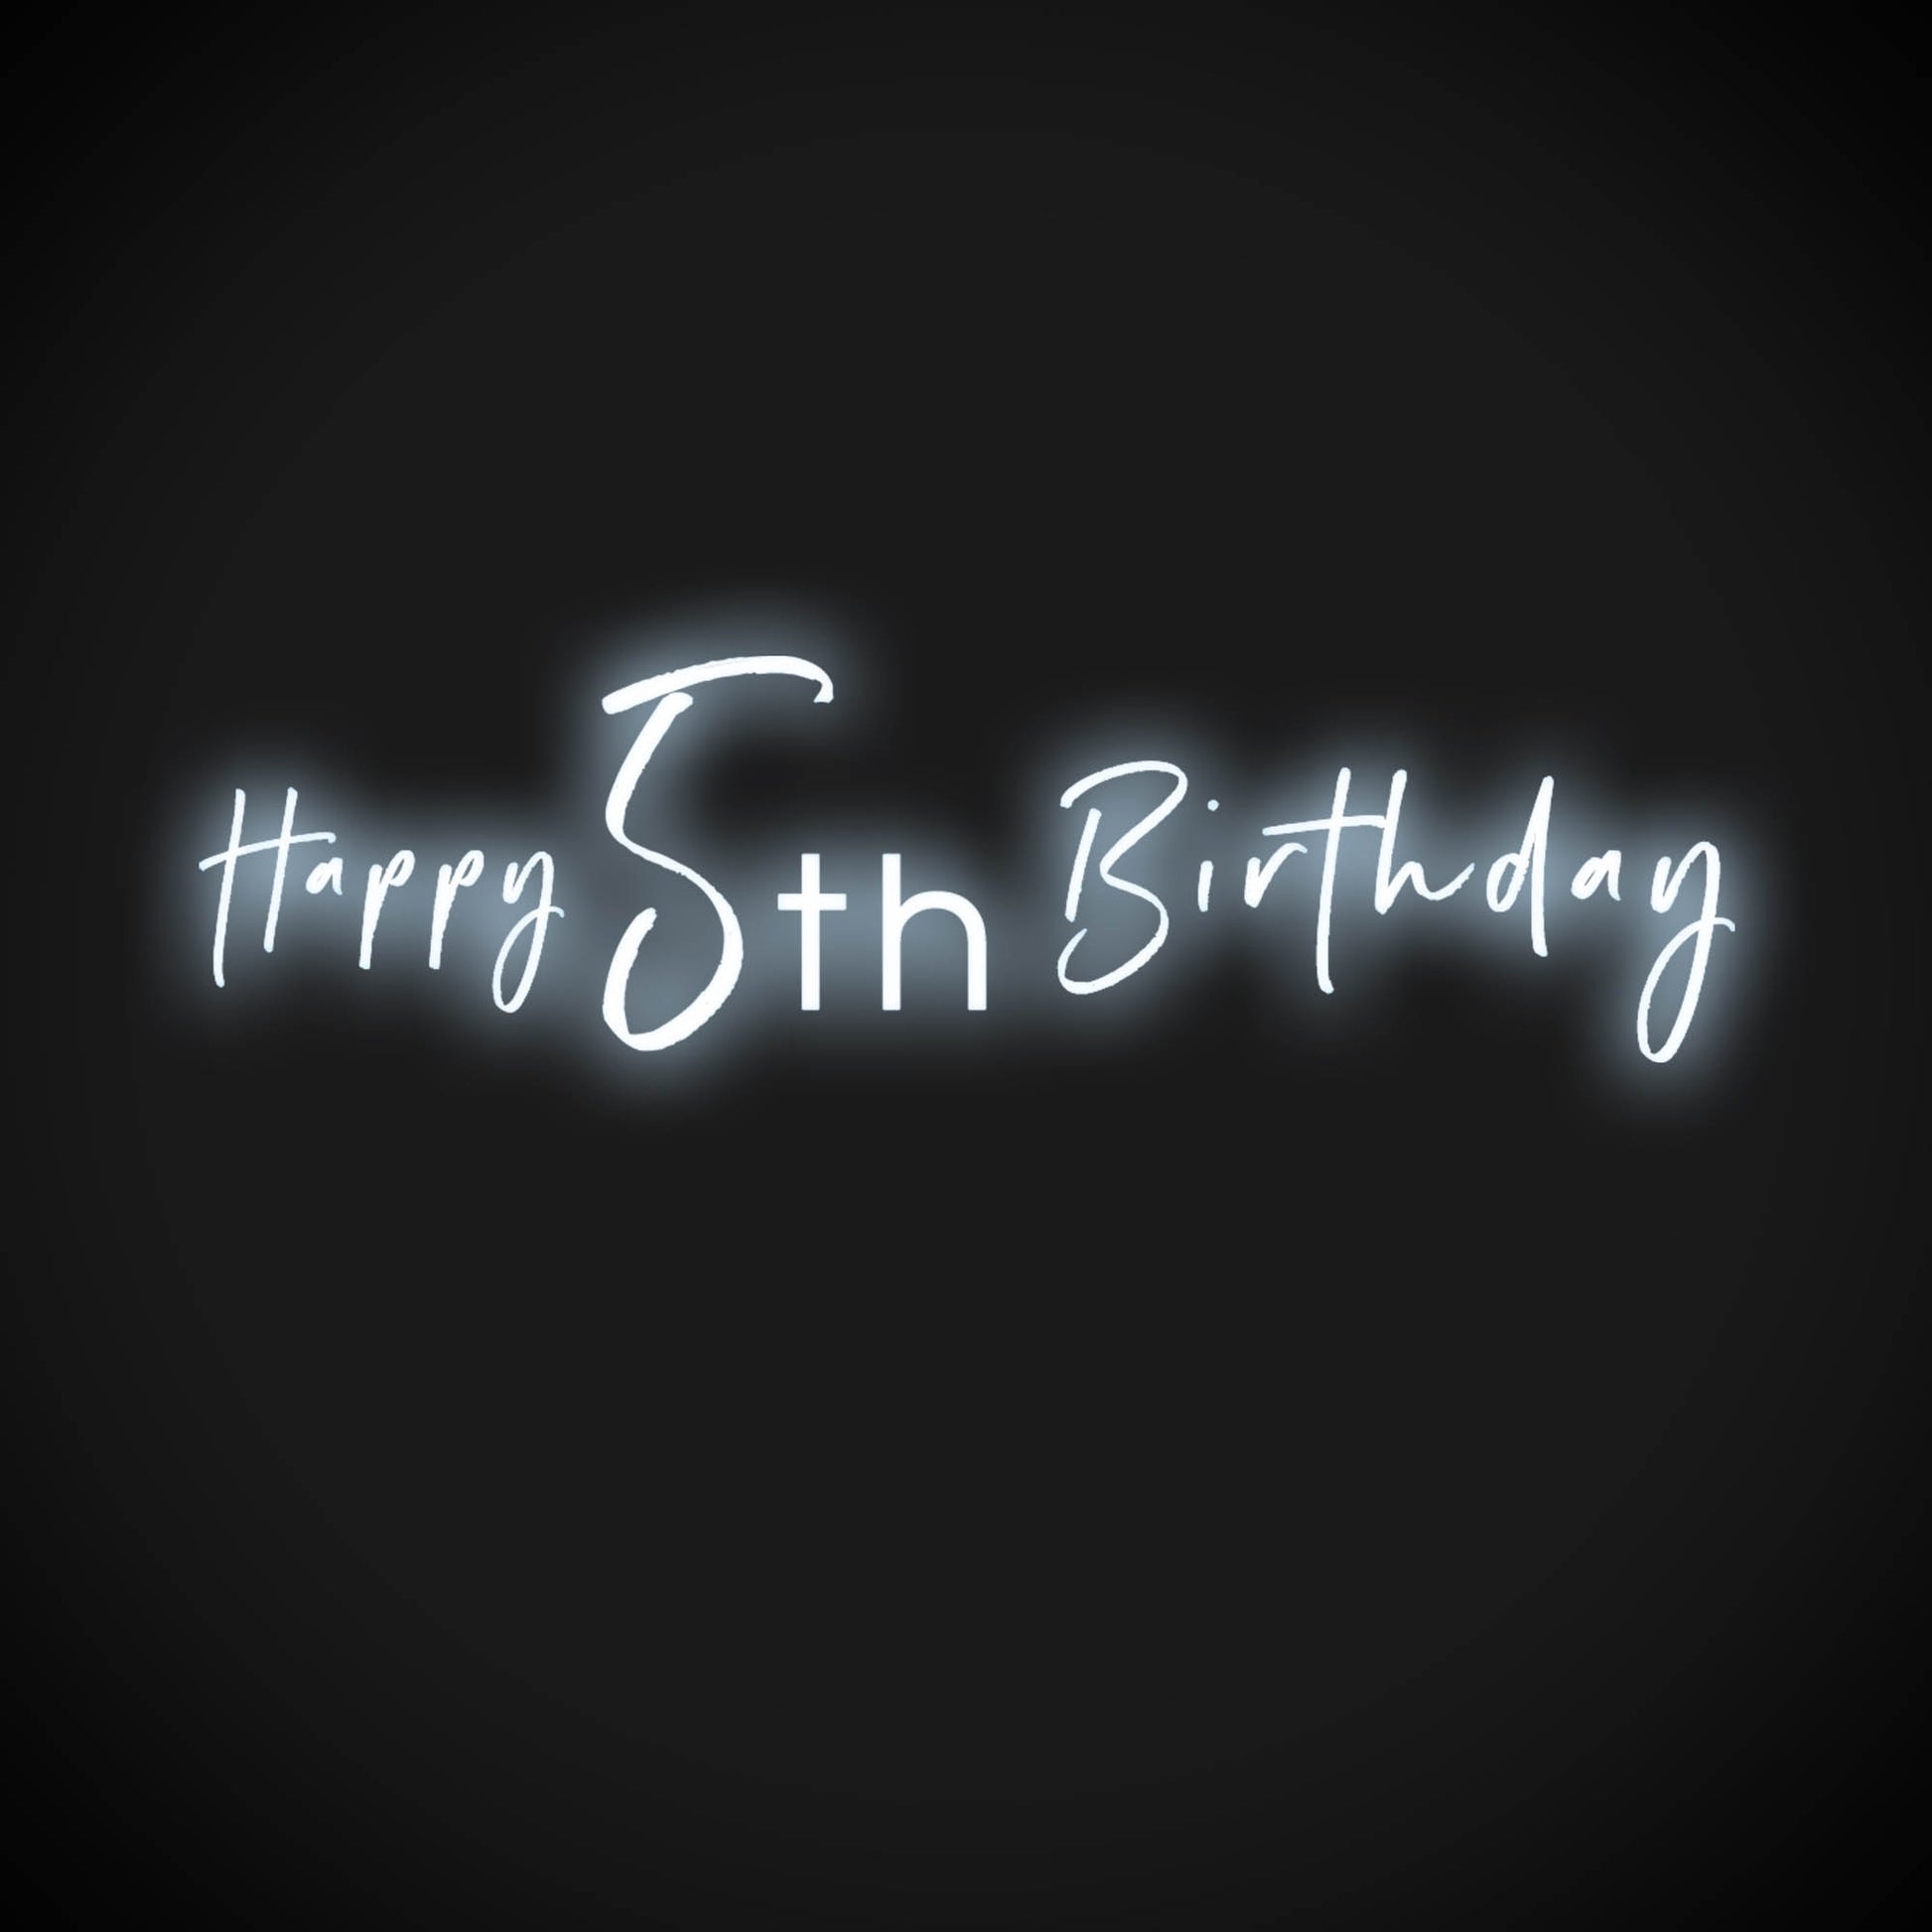 5th Birthday Neon Sign - Neon 5th Birthday Sign - Color Cool White